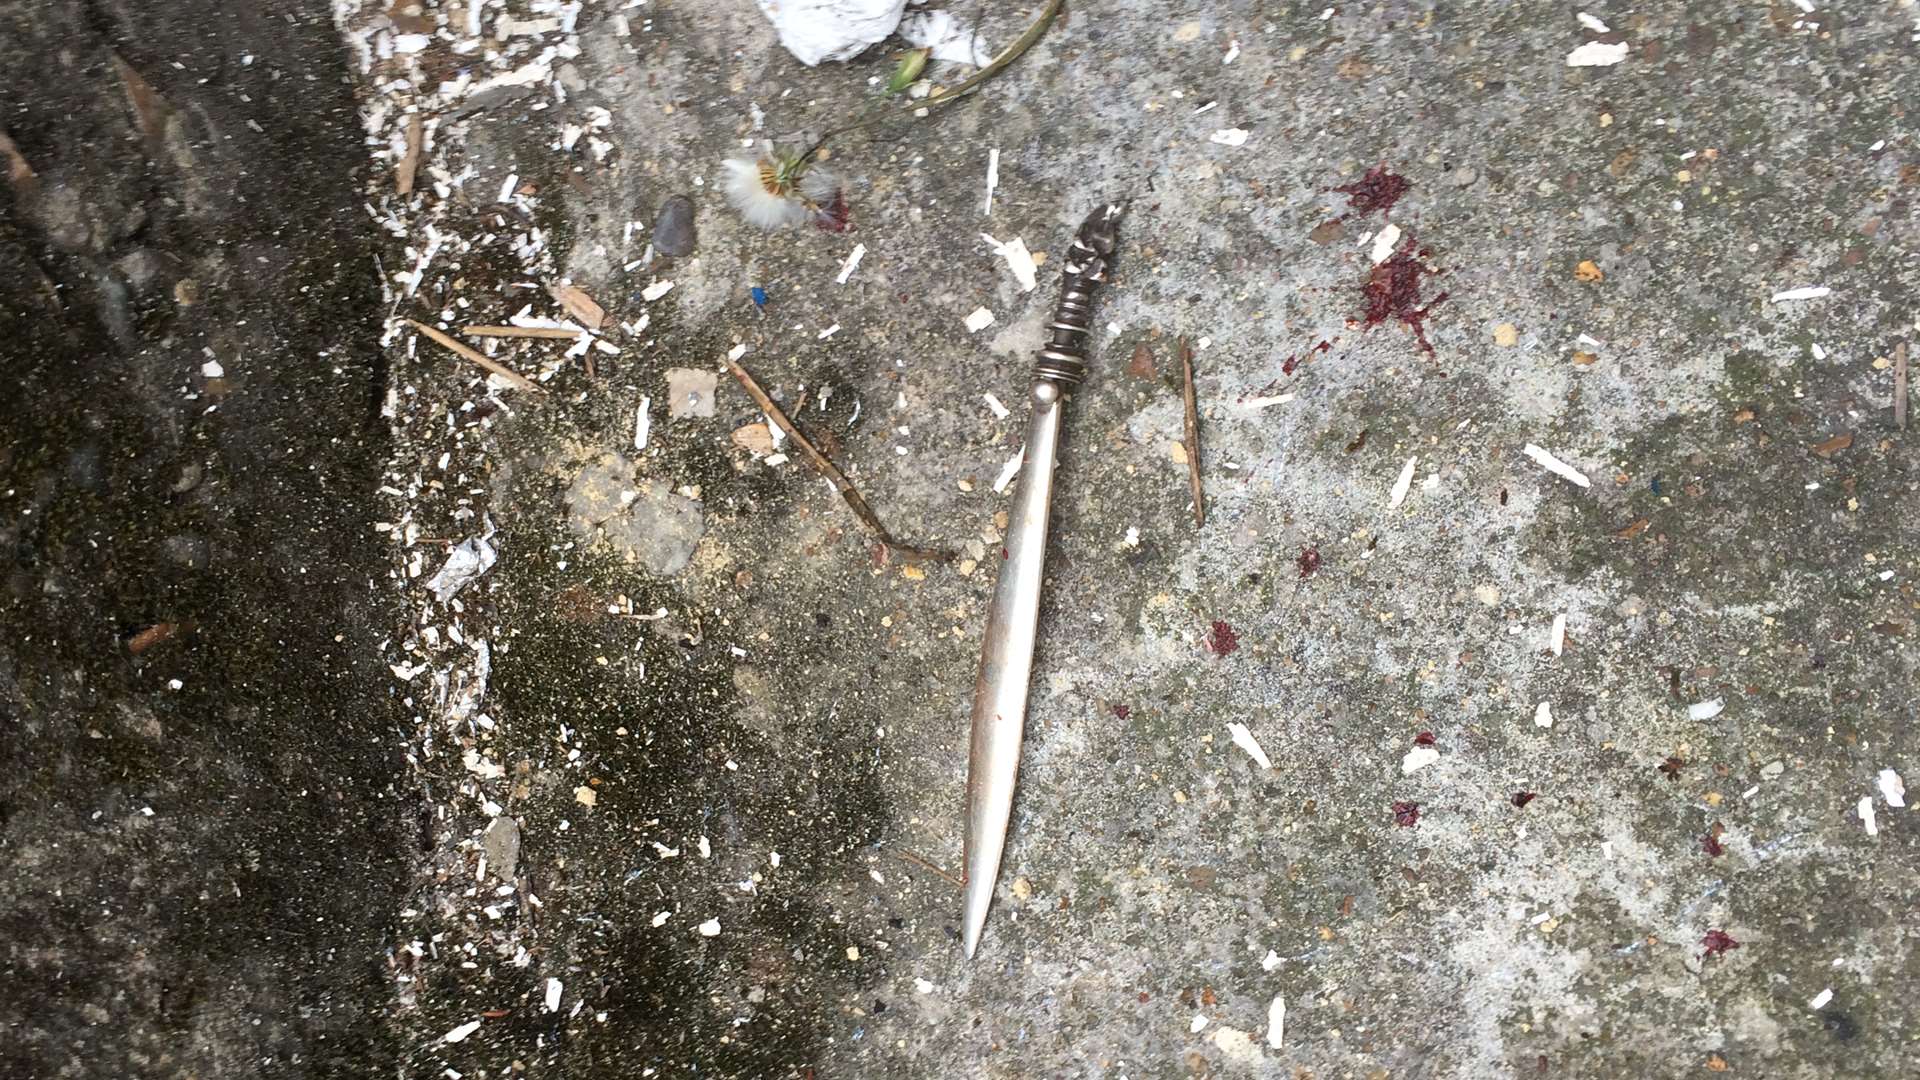 A knife found at the scene of the crime with a splatter of blood next to it